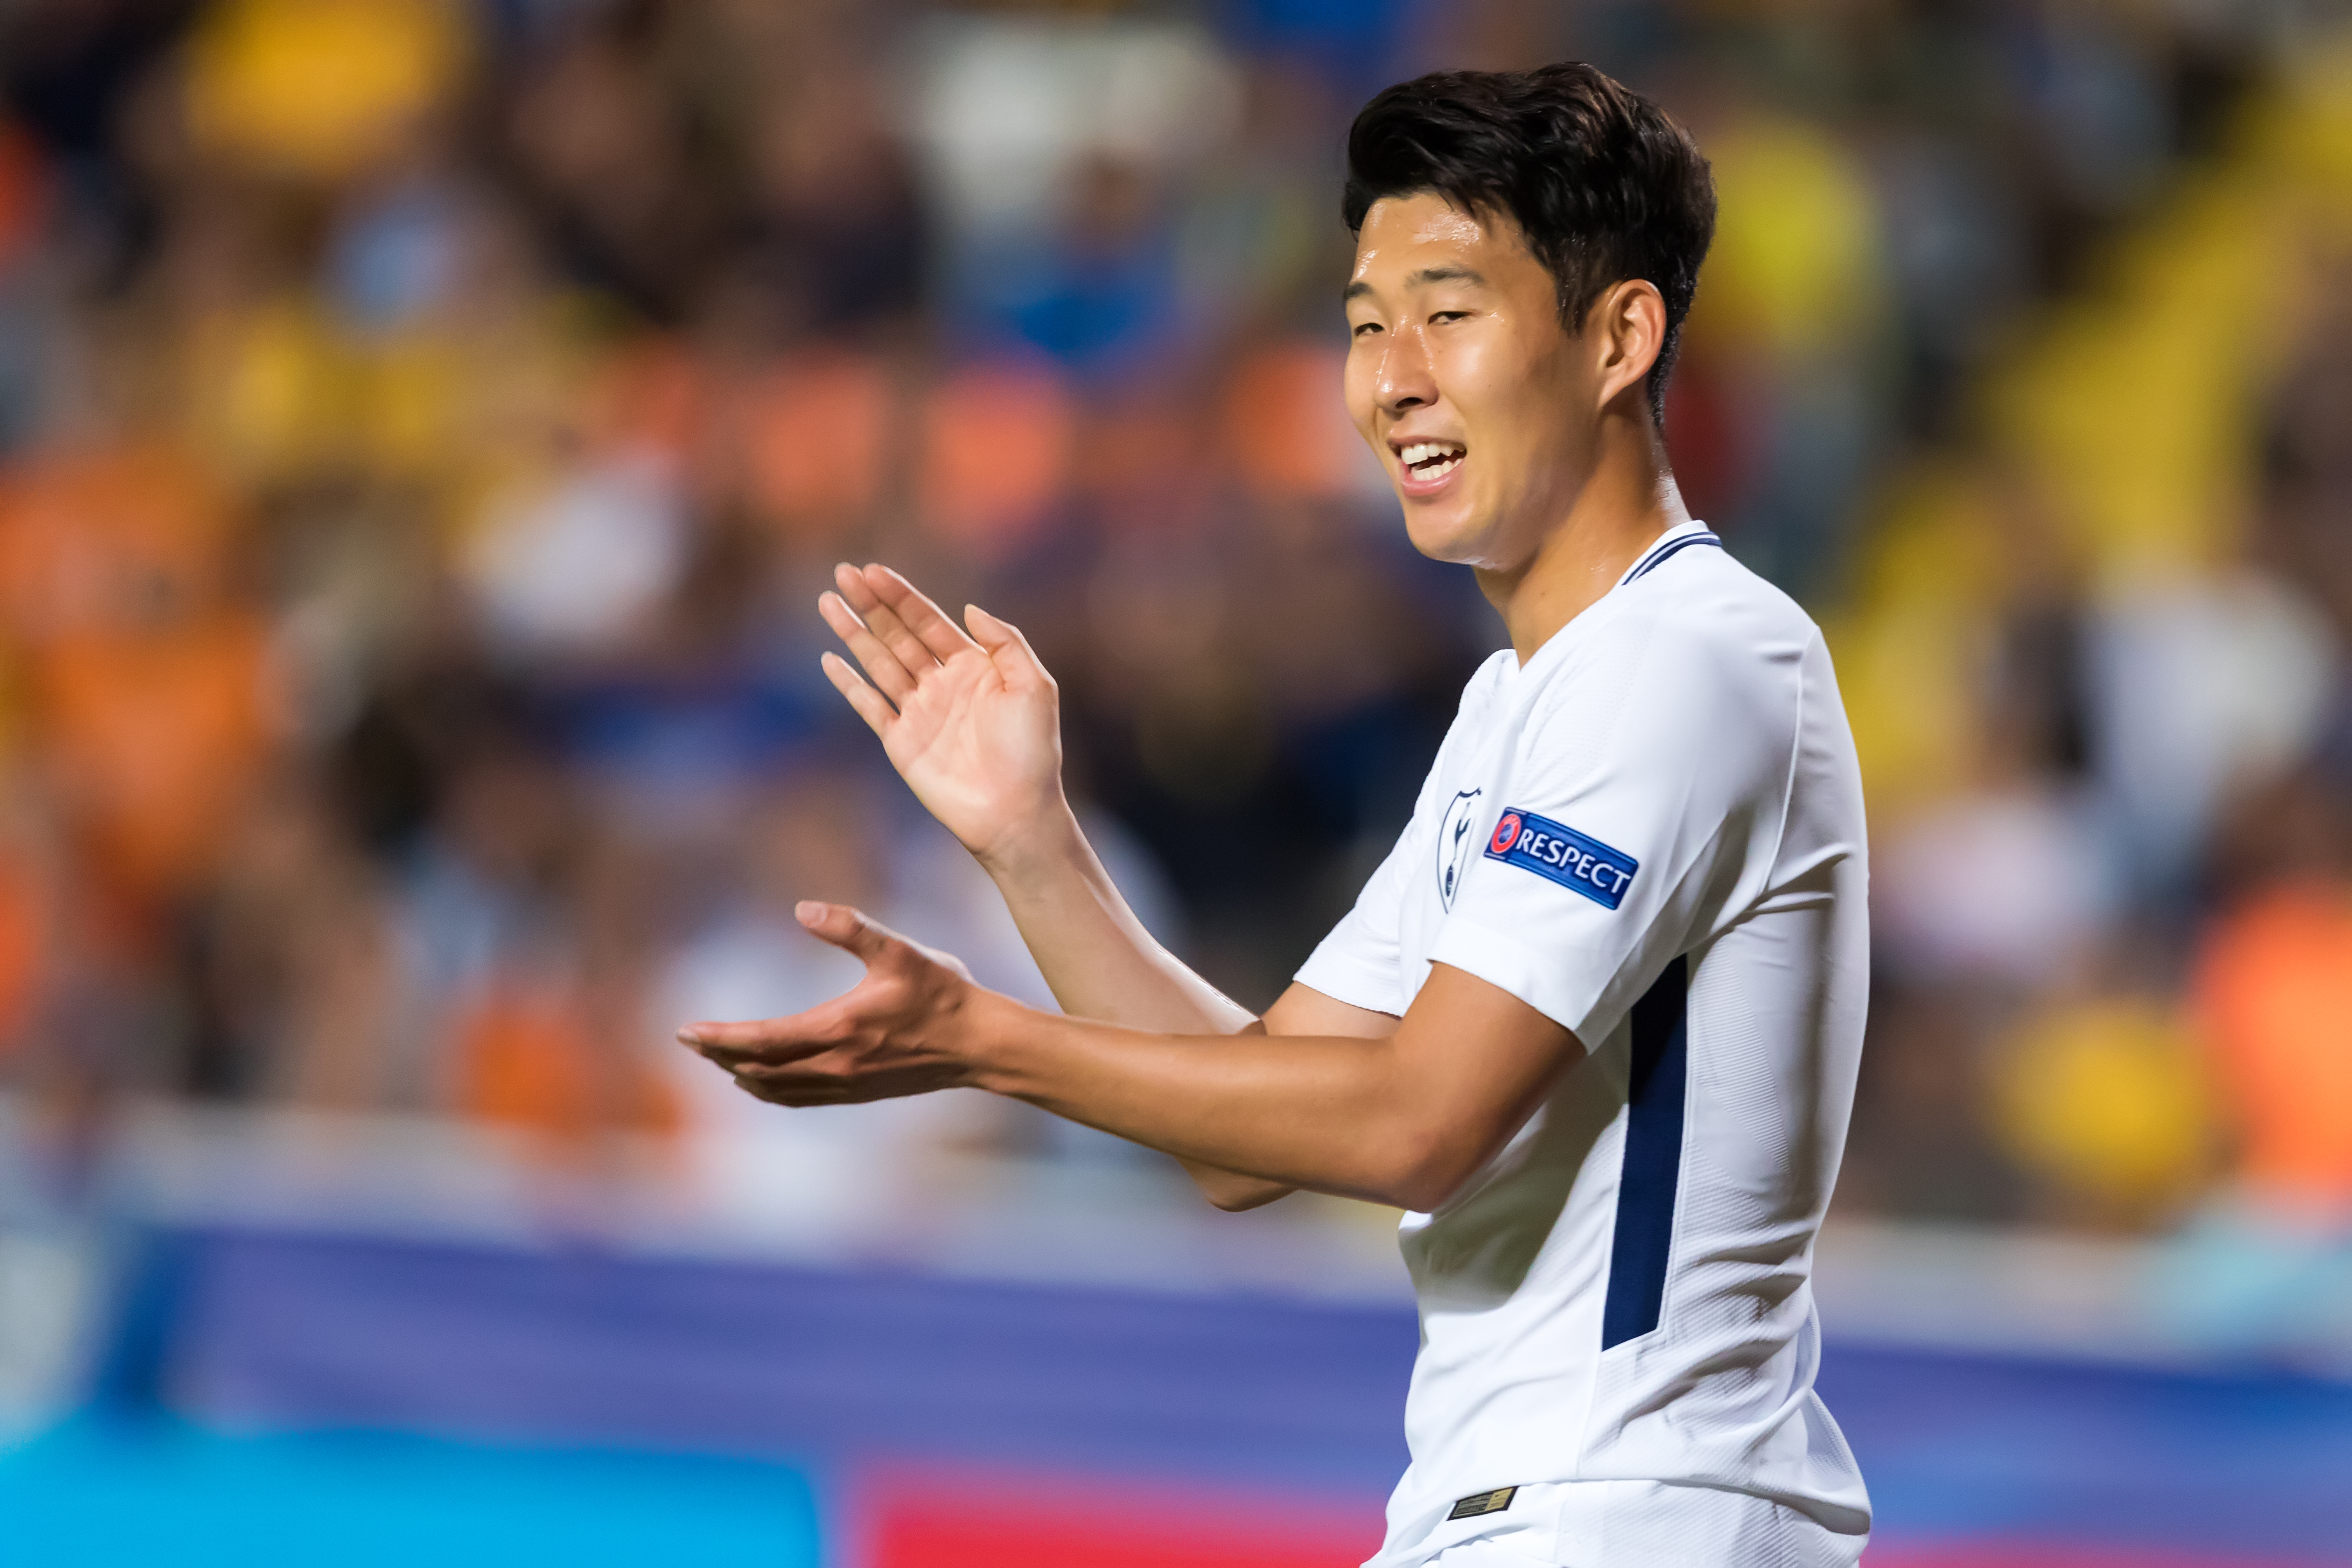 Spurs hotshot Son Heung-min earns military accolade